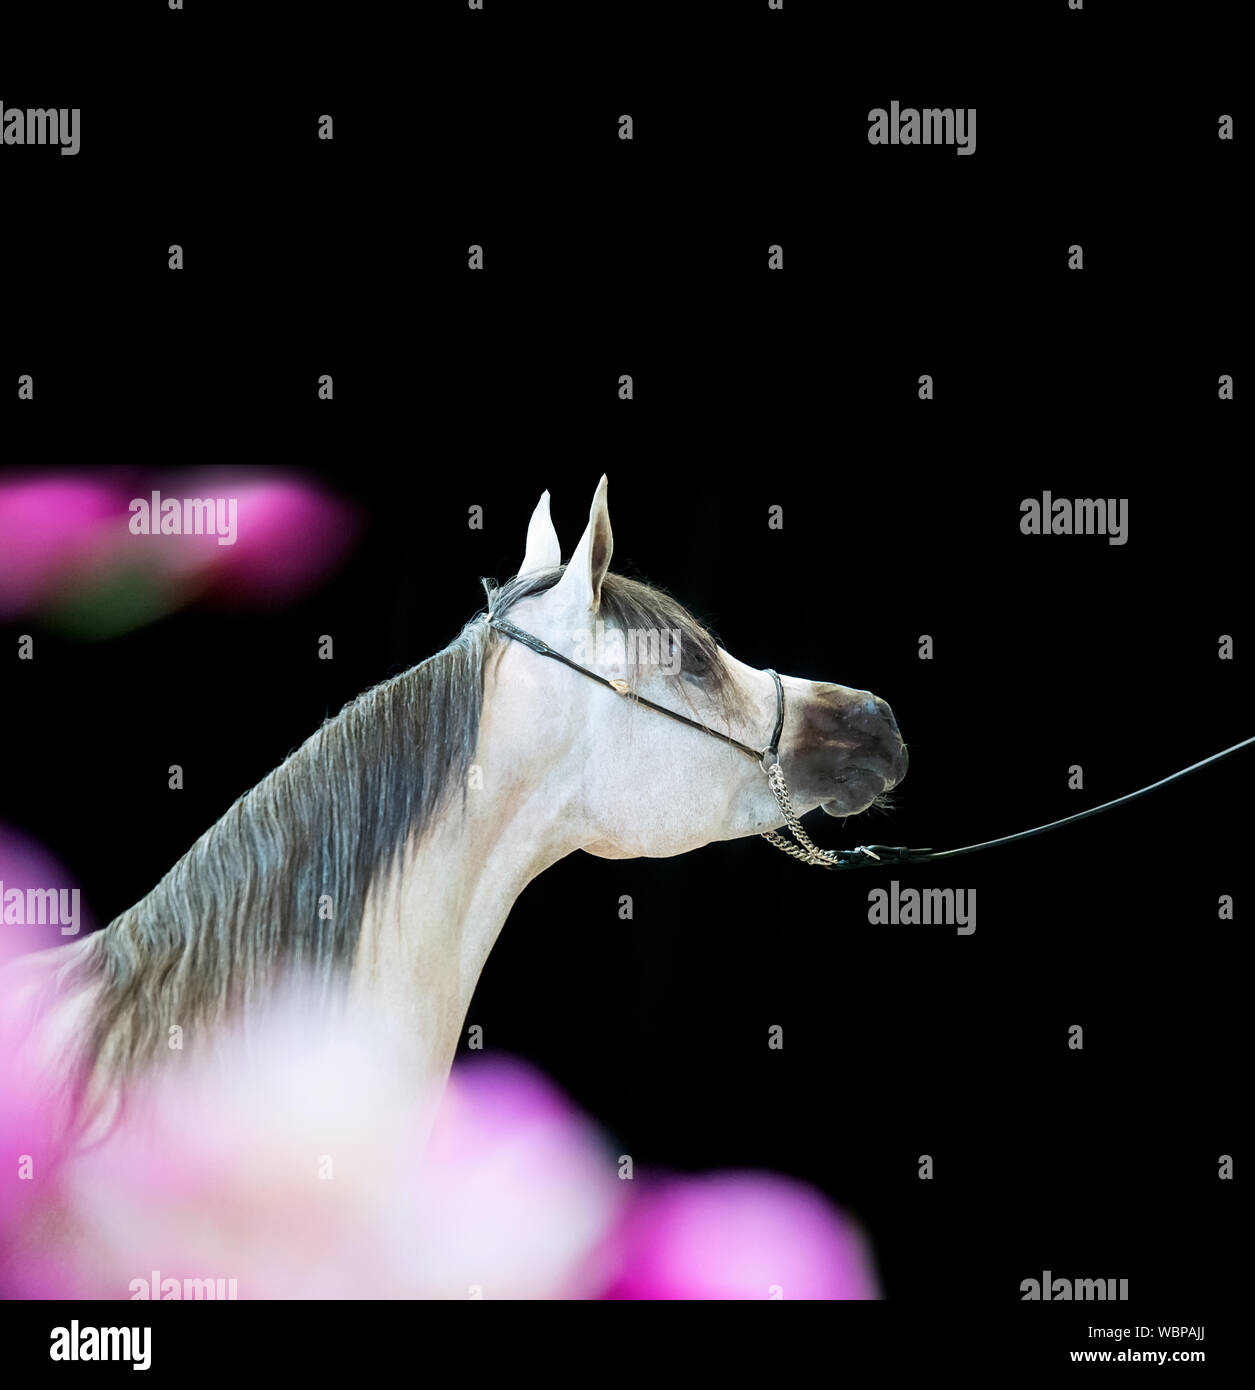 Horse Amidst Flowers Against Black Background Stock Photo